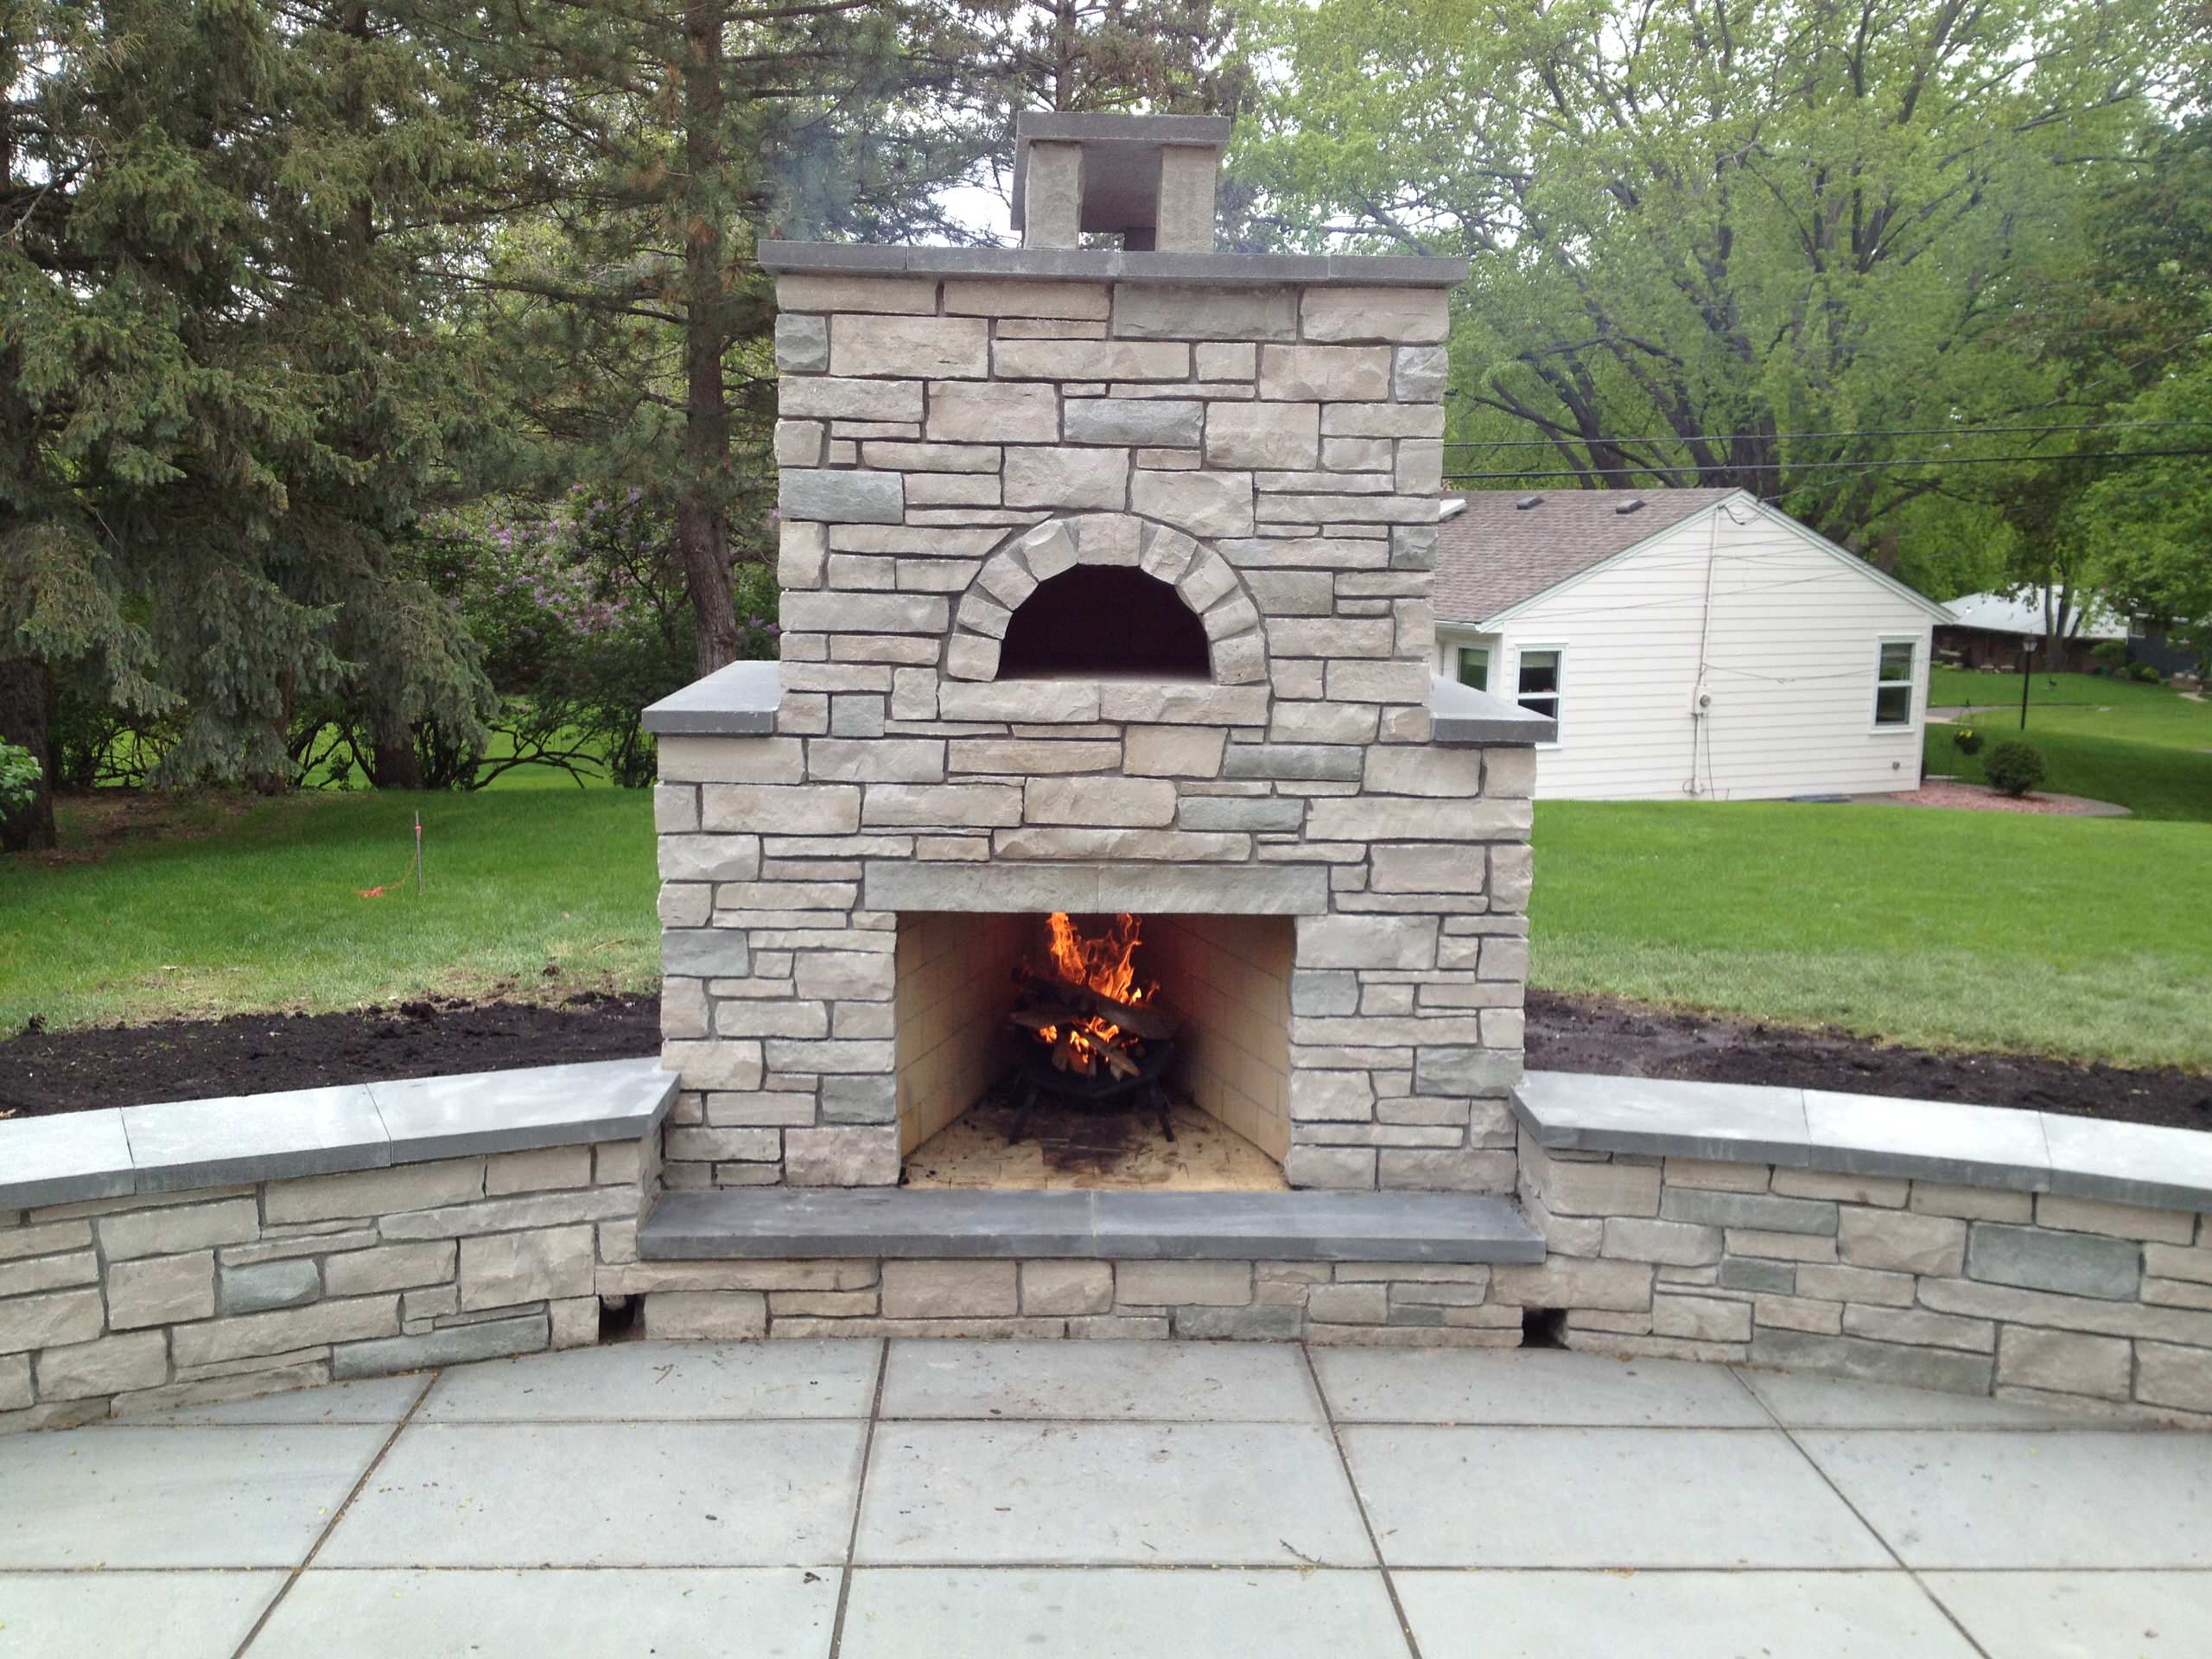 Outdoor Fondulac Stone Fireplace And, Pictures Of Outdoor Fireplaces And Pizza Ovens